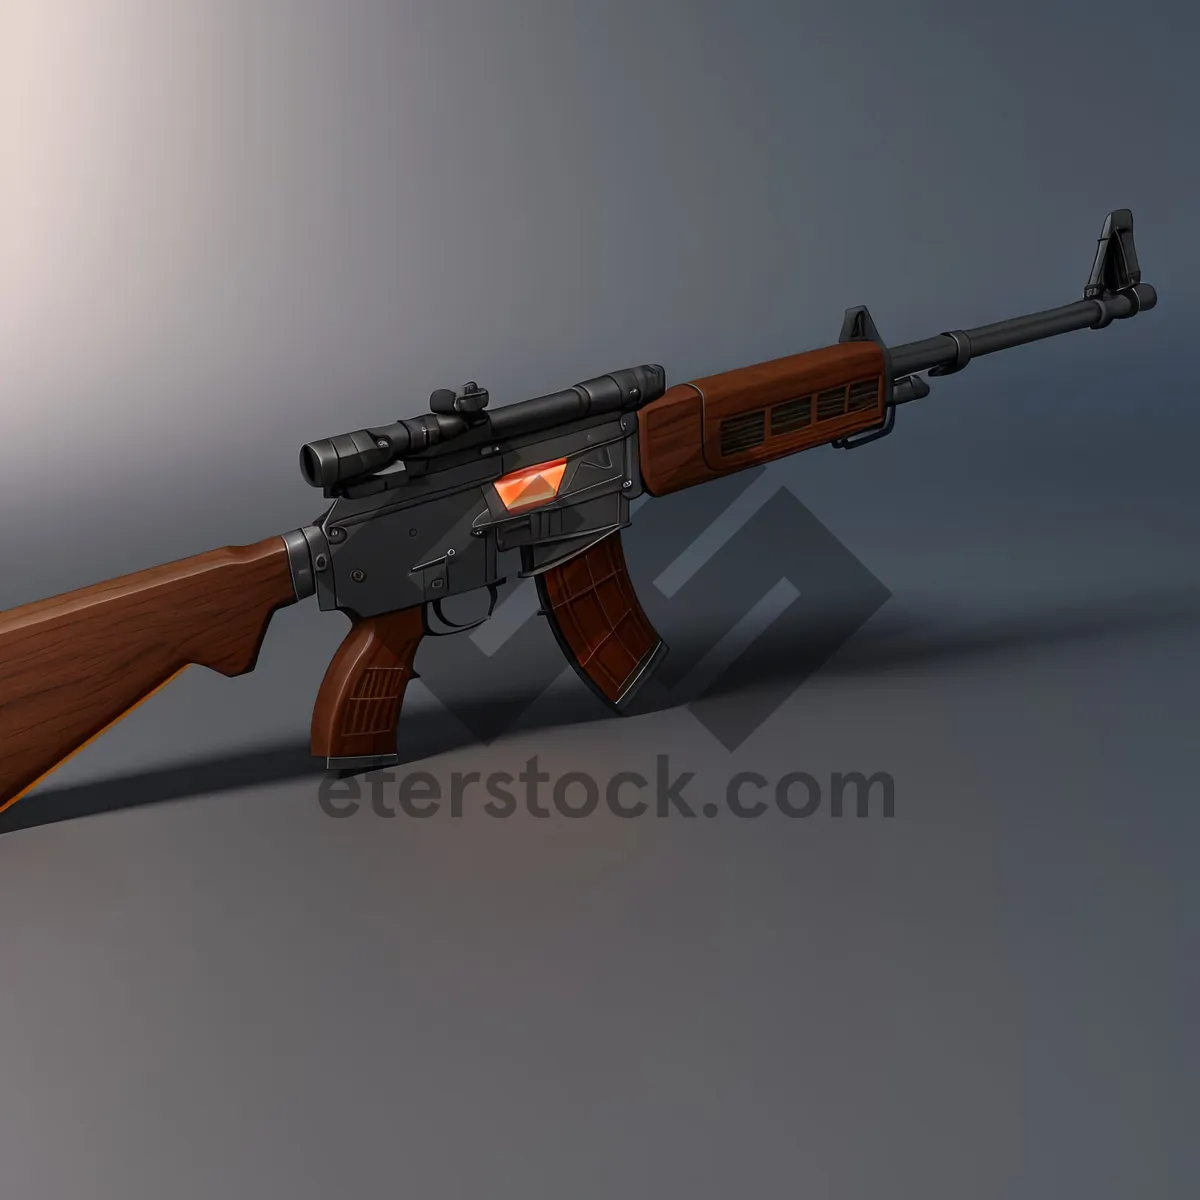 Picture of Modern Assault Rifle for Military Use